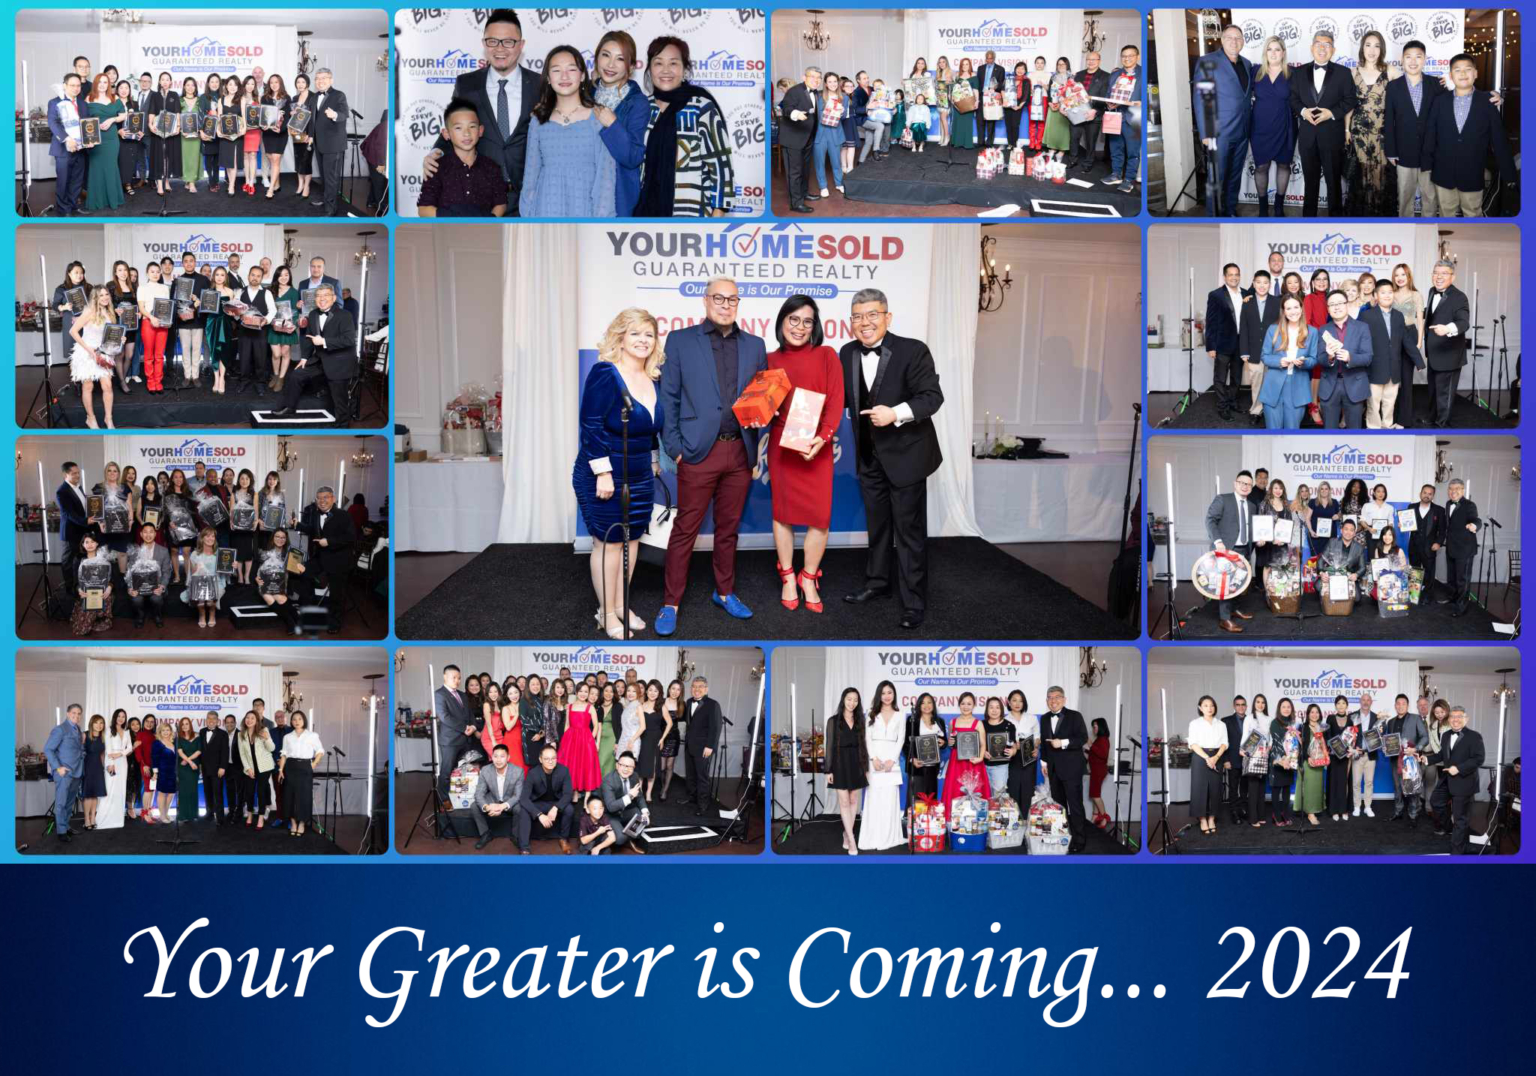 Your Home Sold Guaranteed Realty Hosts 2023 Best Of The Best Awards Banquet Under The Theme Your Greater Is Coming. 2024 1 1536x1076 